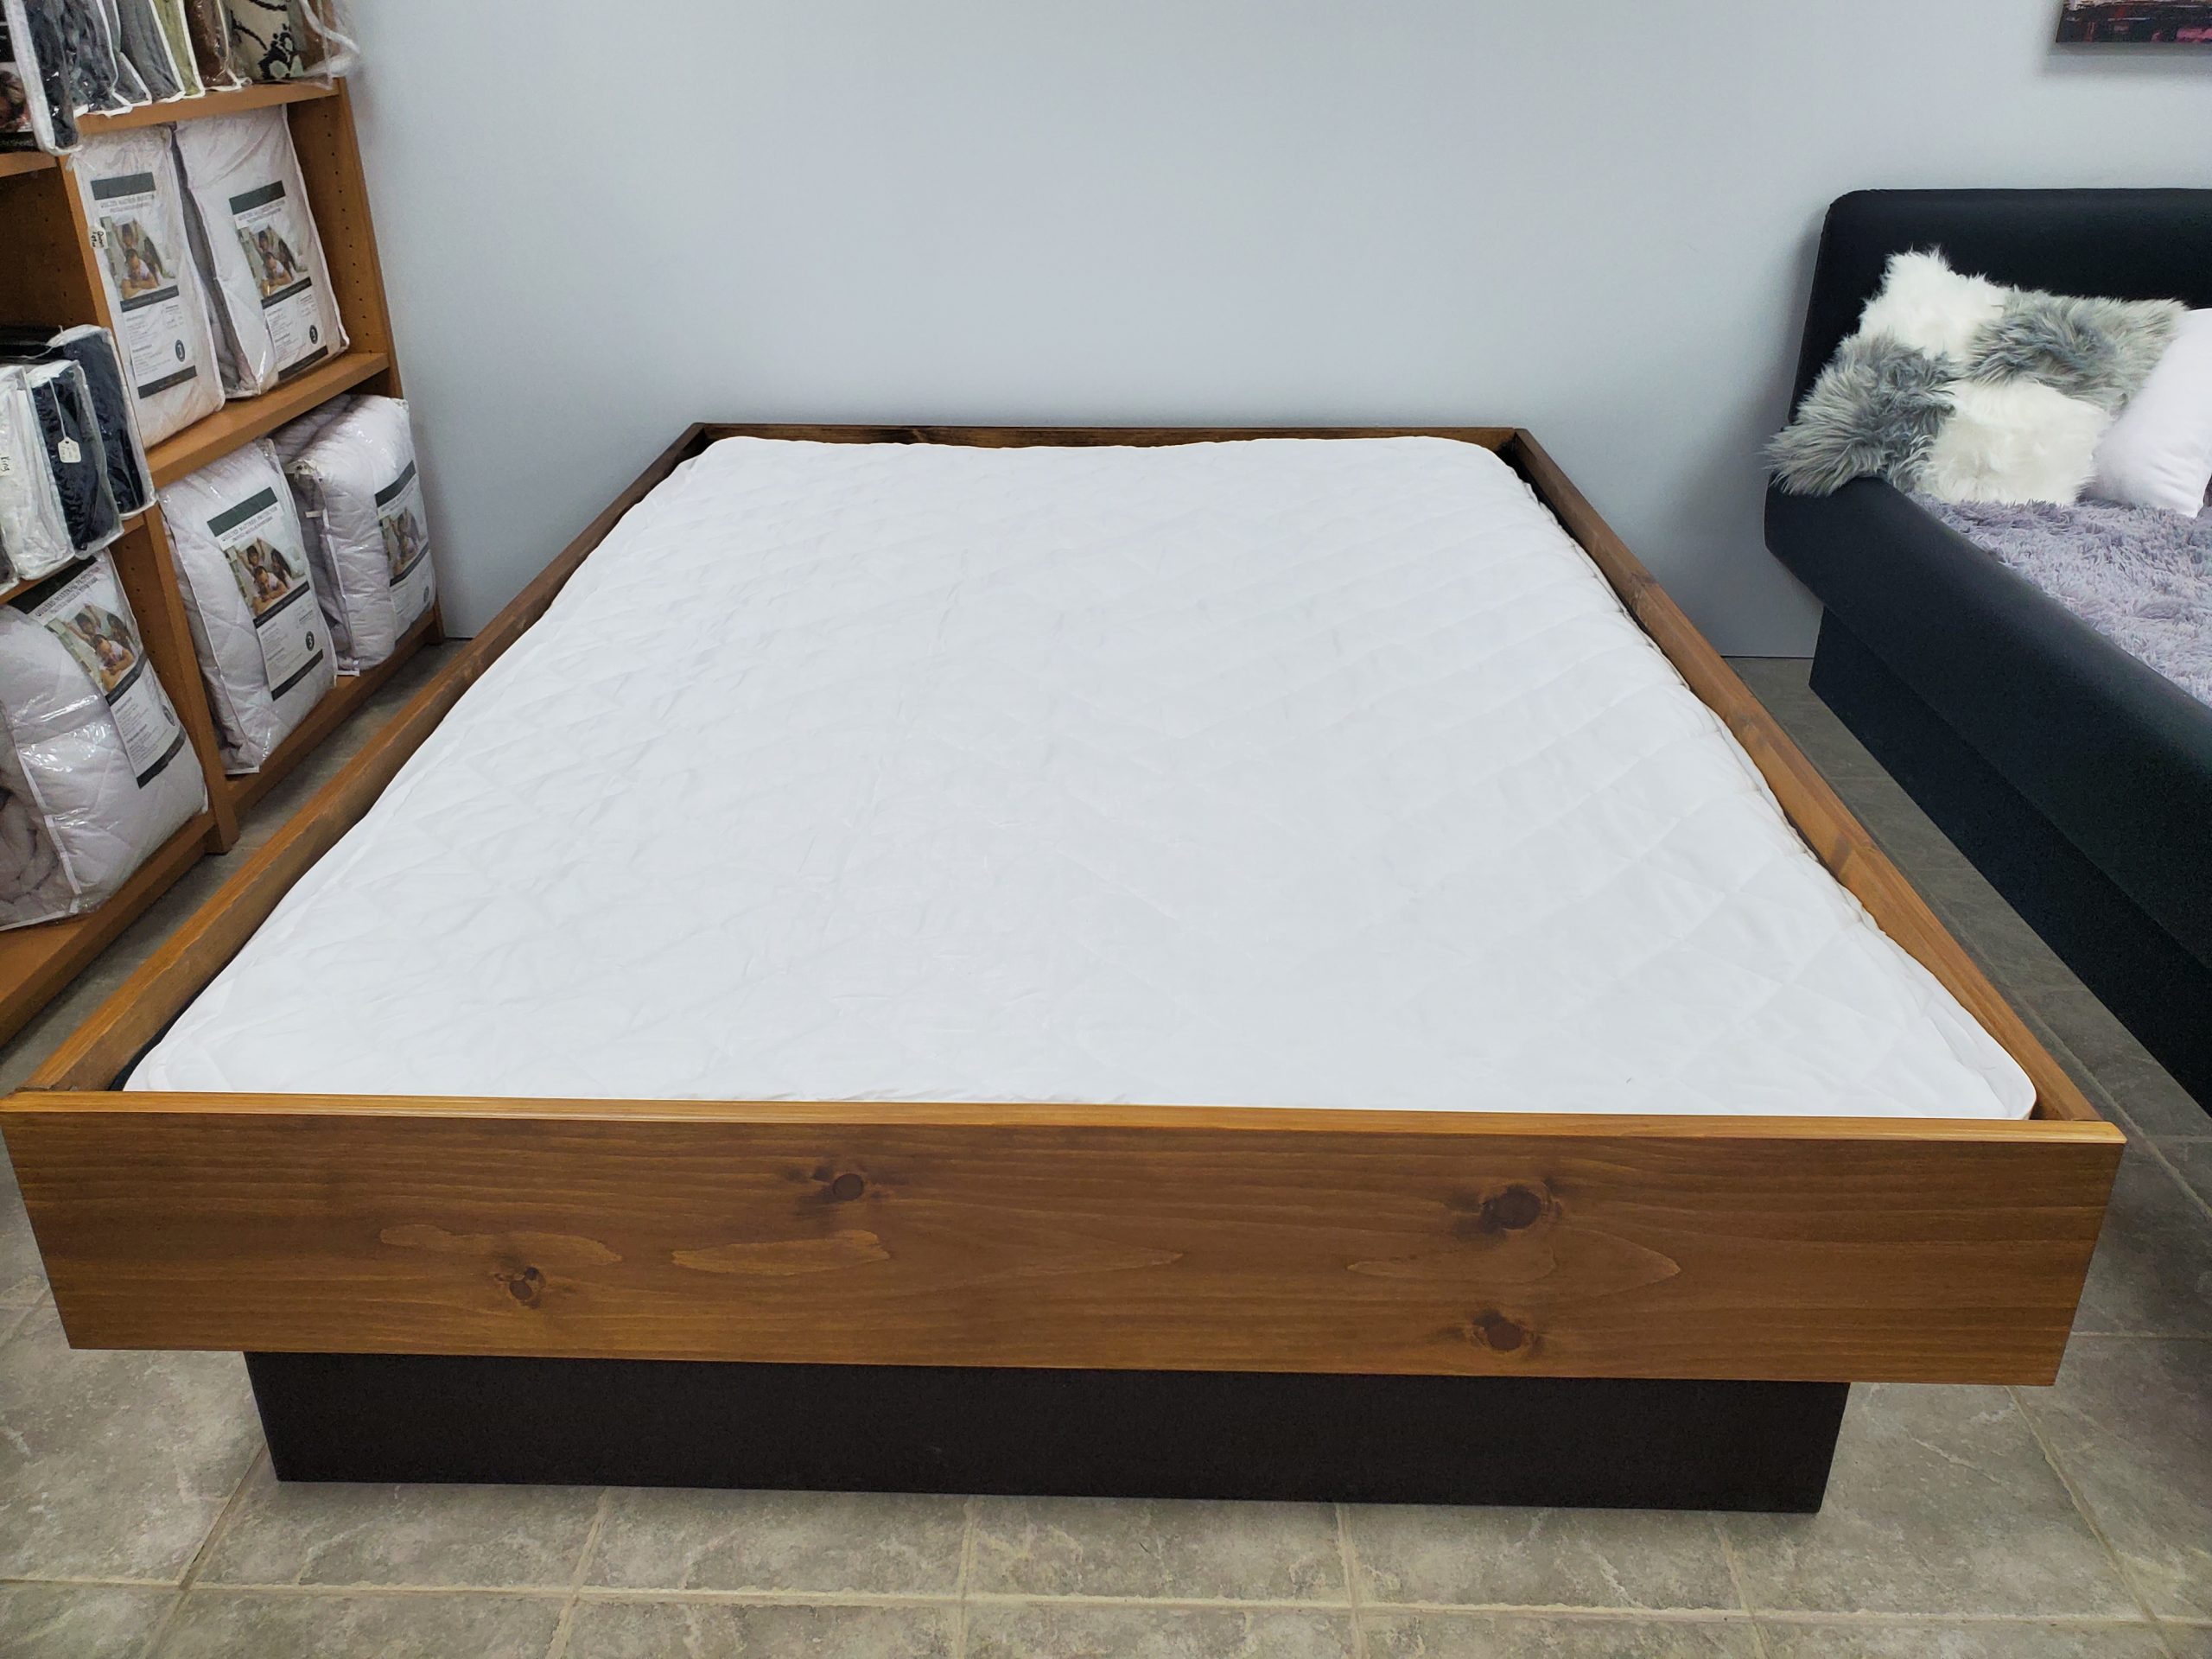 mattress pad for super single waterbed